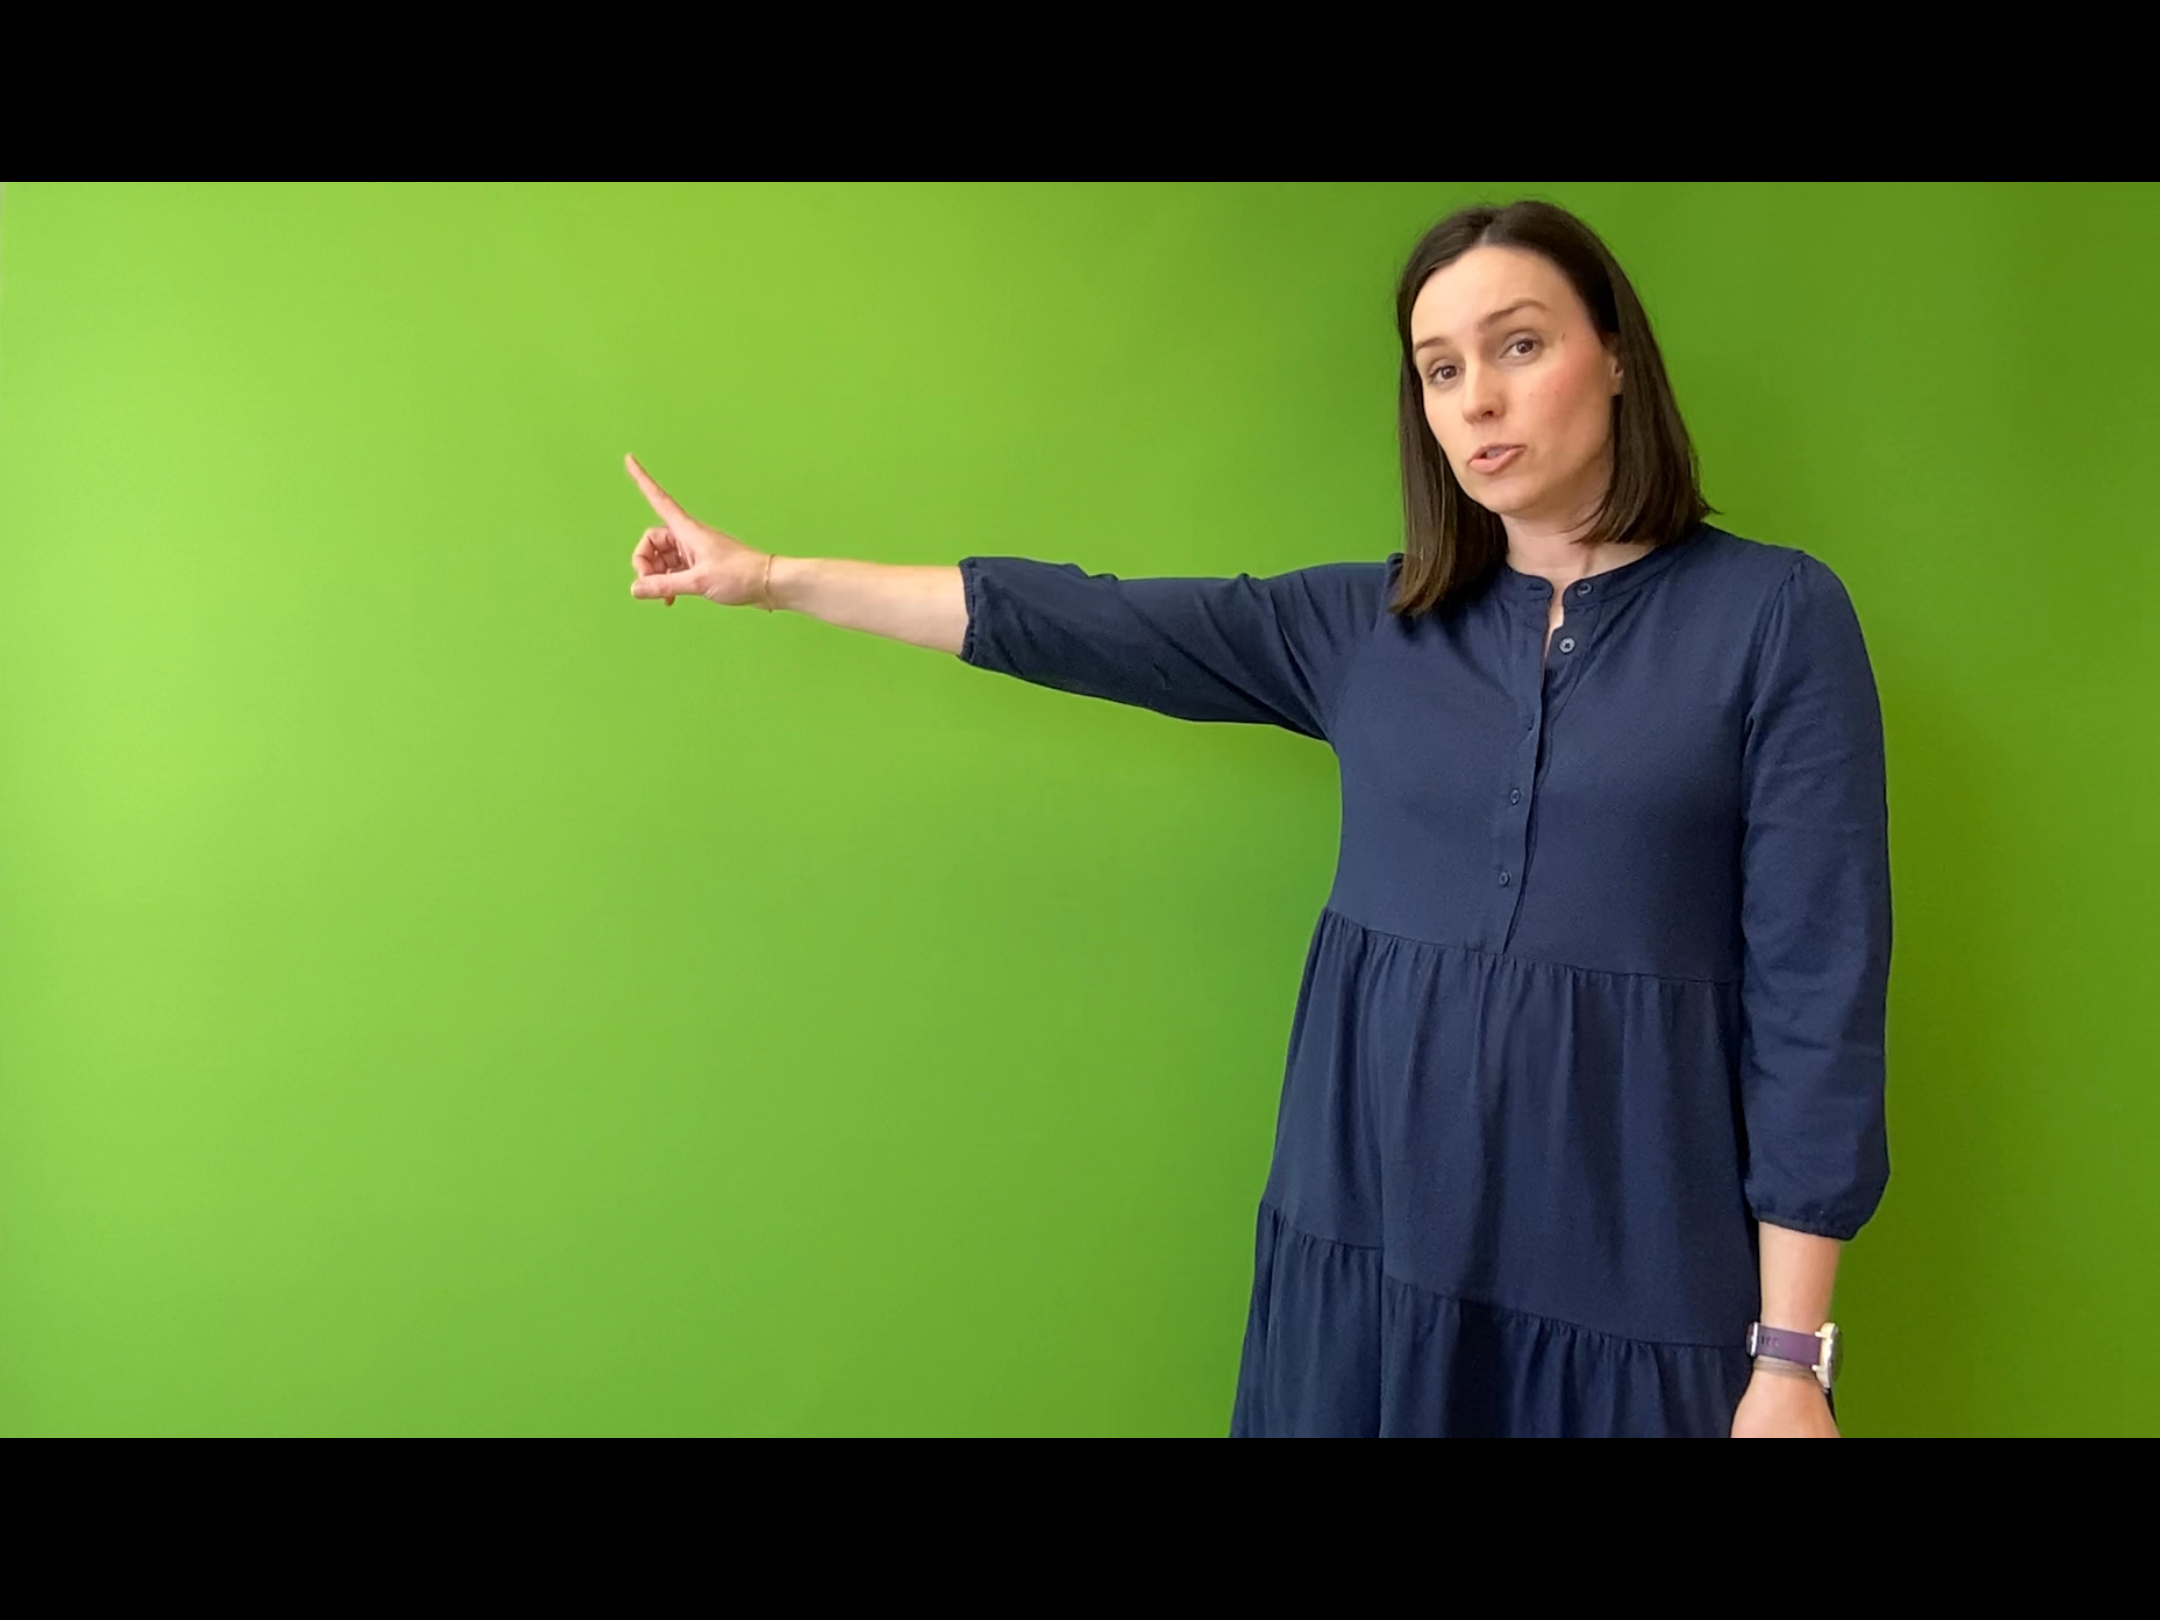 A woman stands in front of a green screen, pointing.